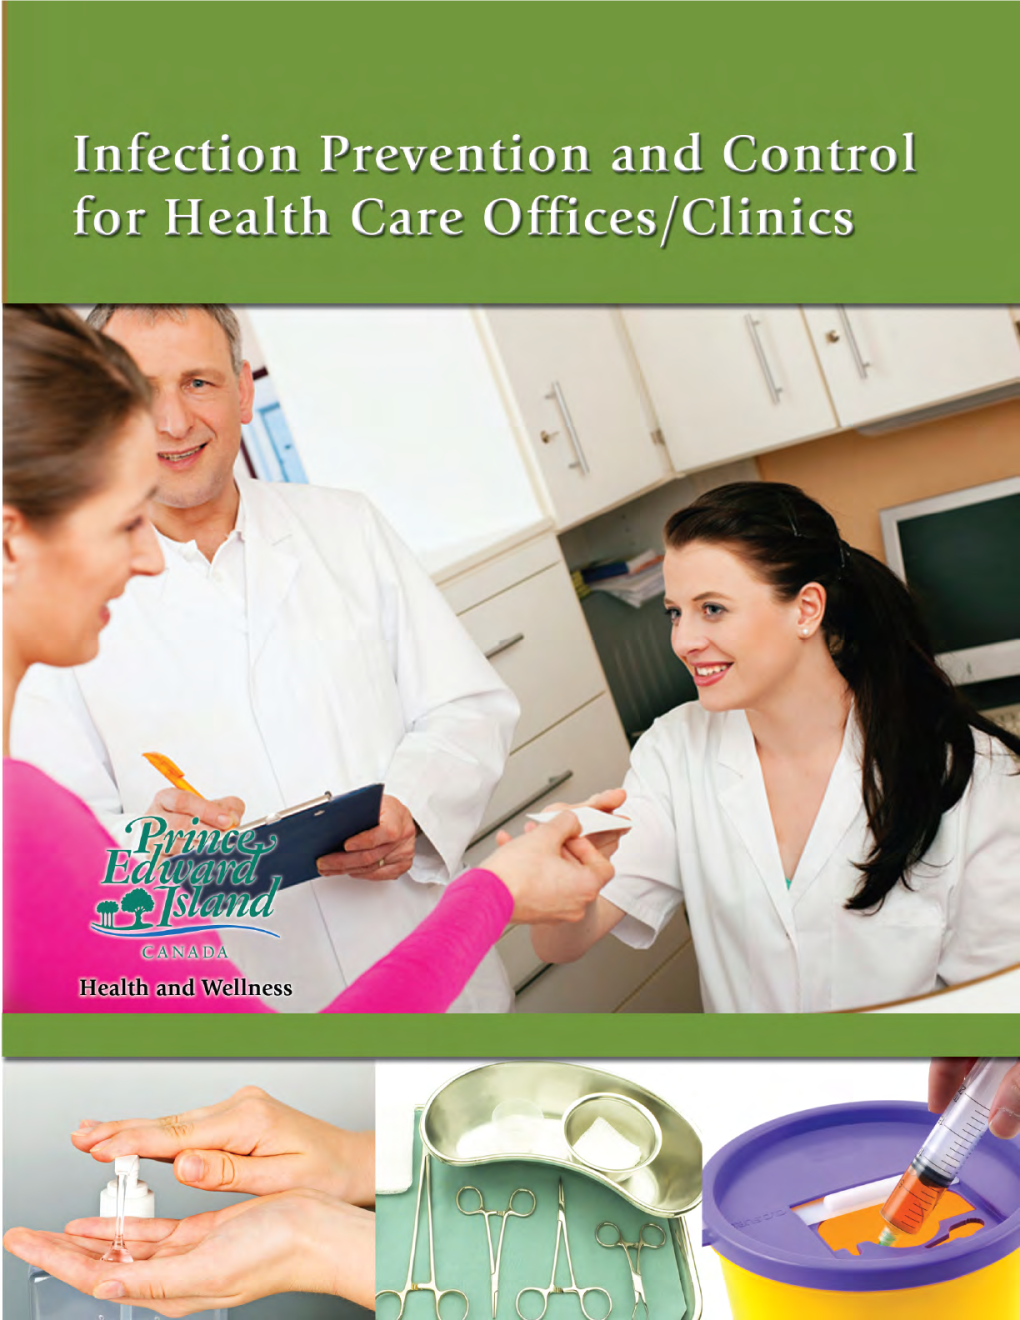 Infection Control for Health Care Offices and Clinics